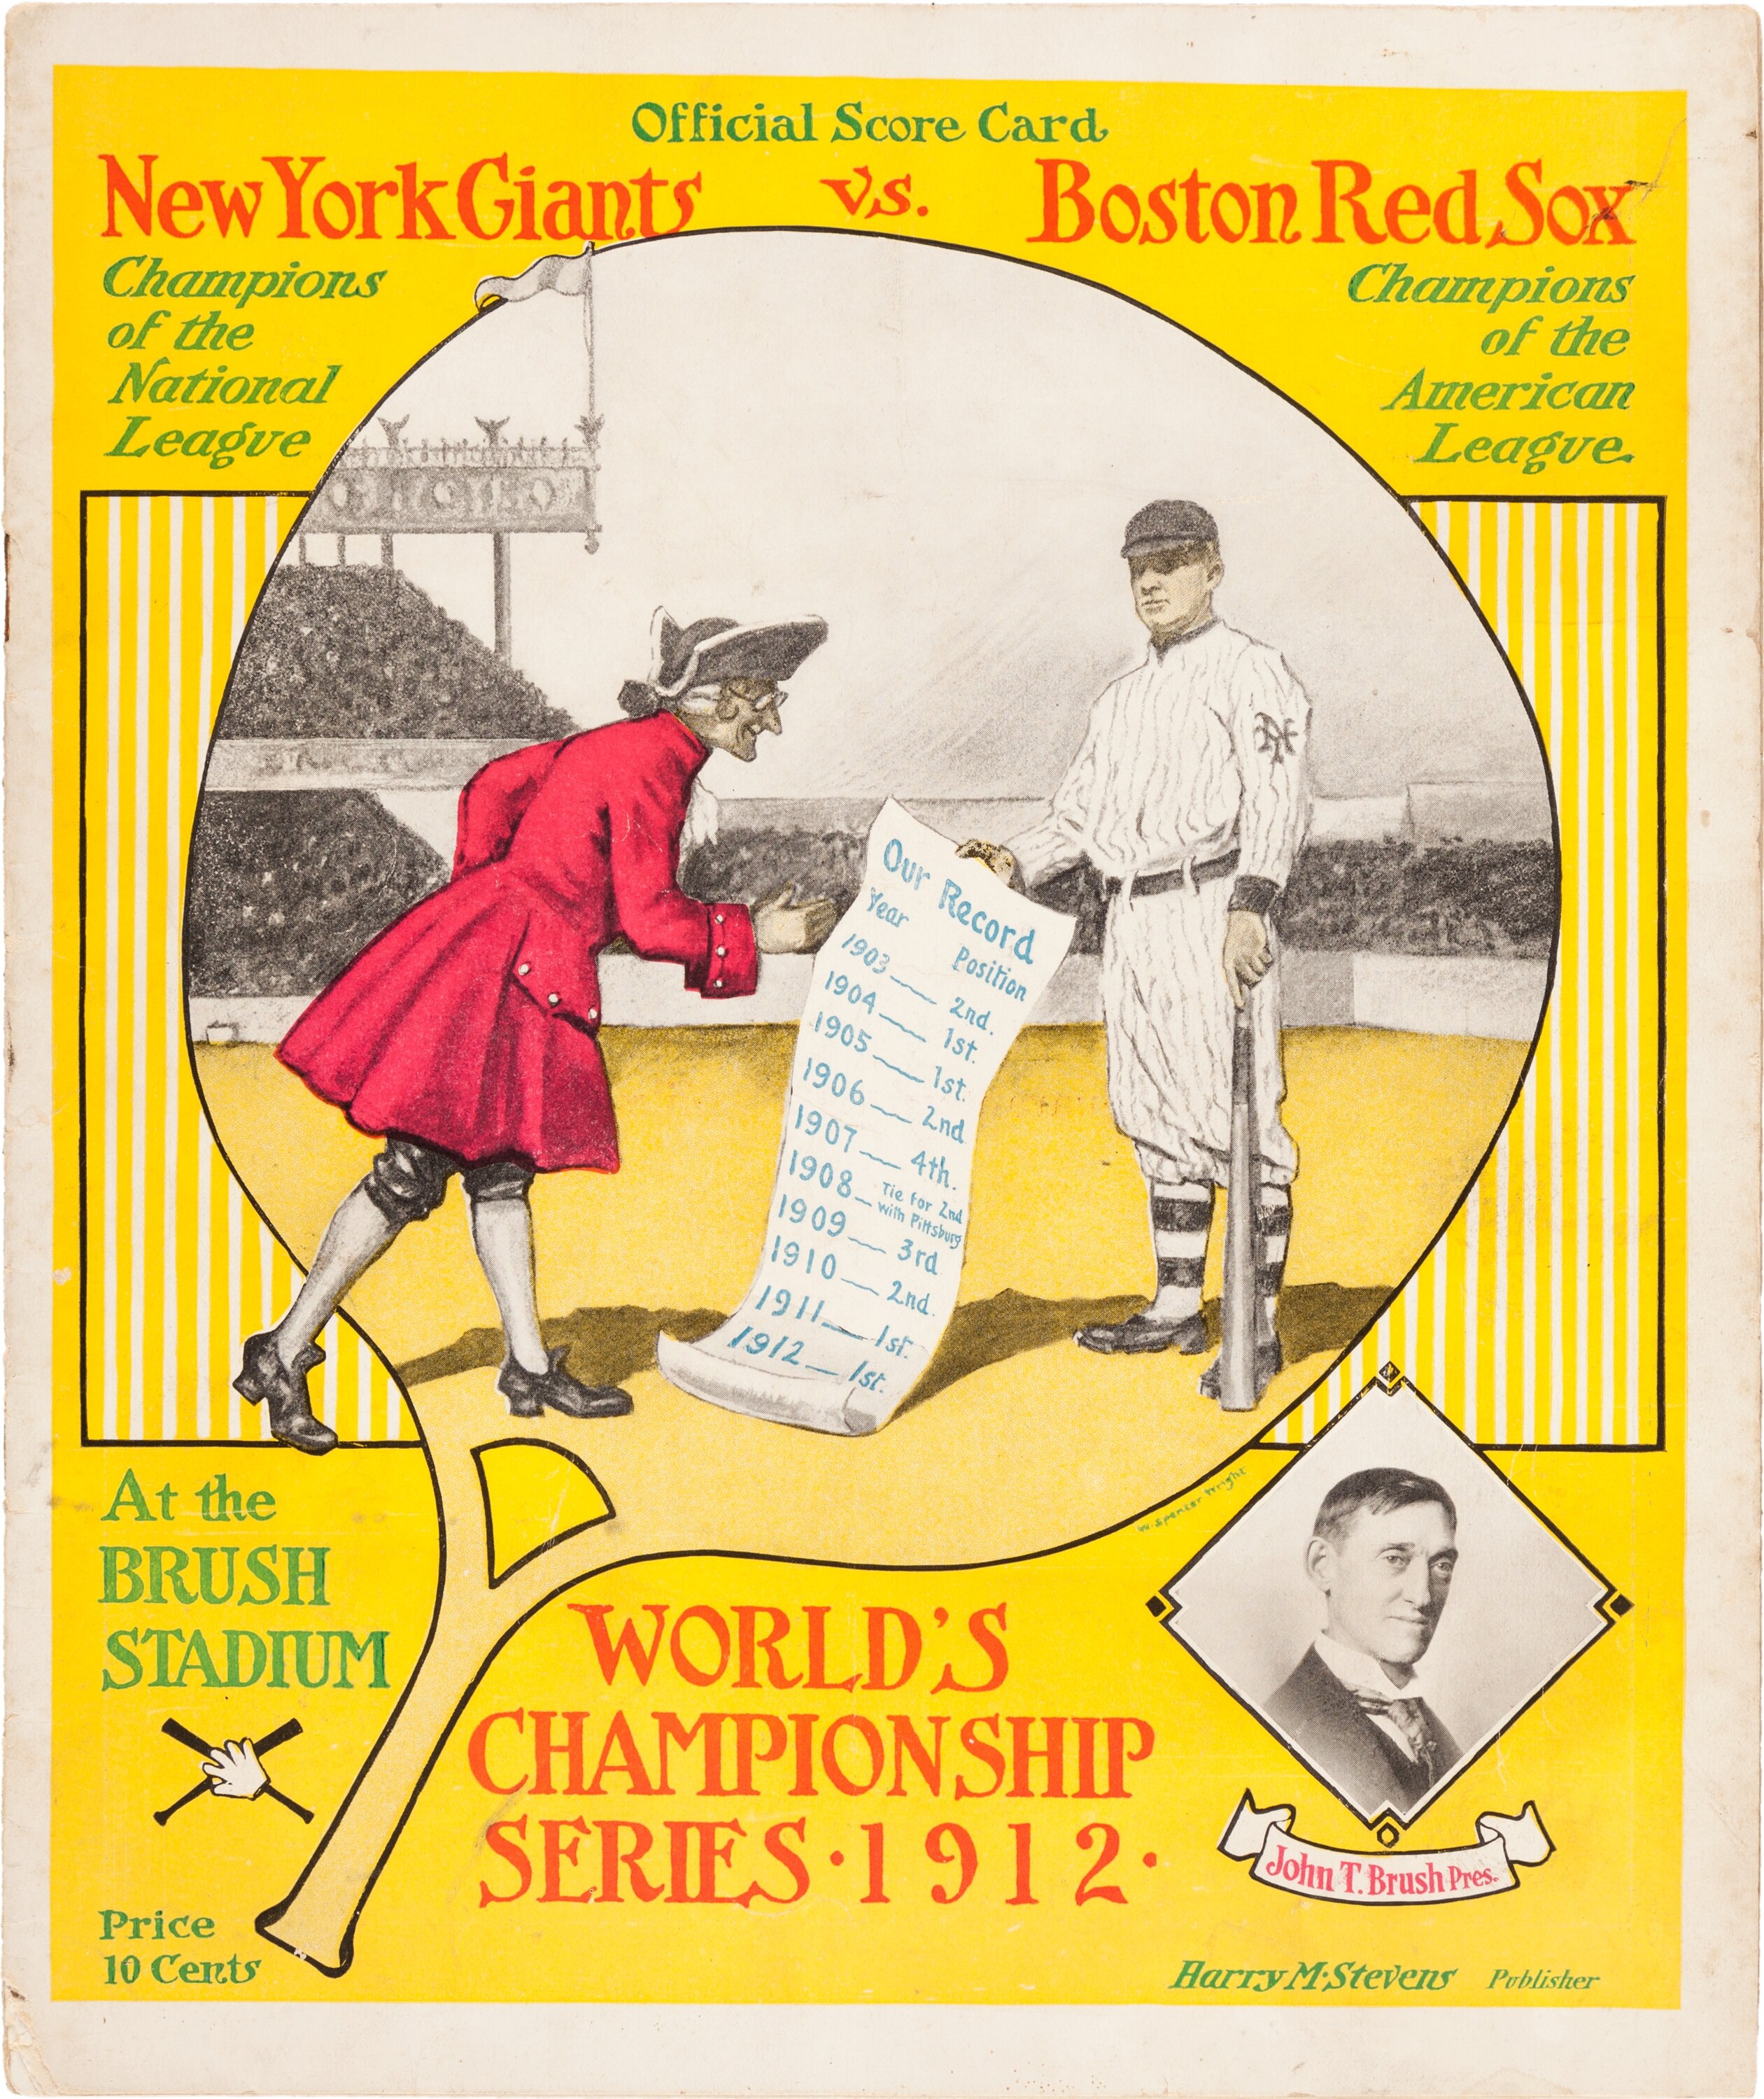 Rare Pittsburgh Program from the First World Series in 1903 Being Sold